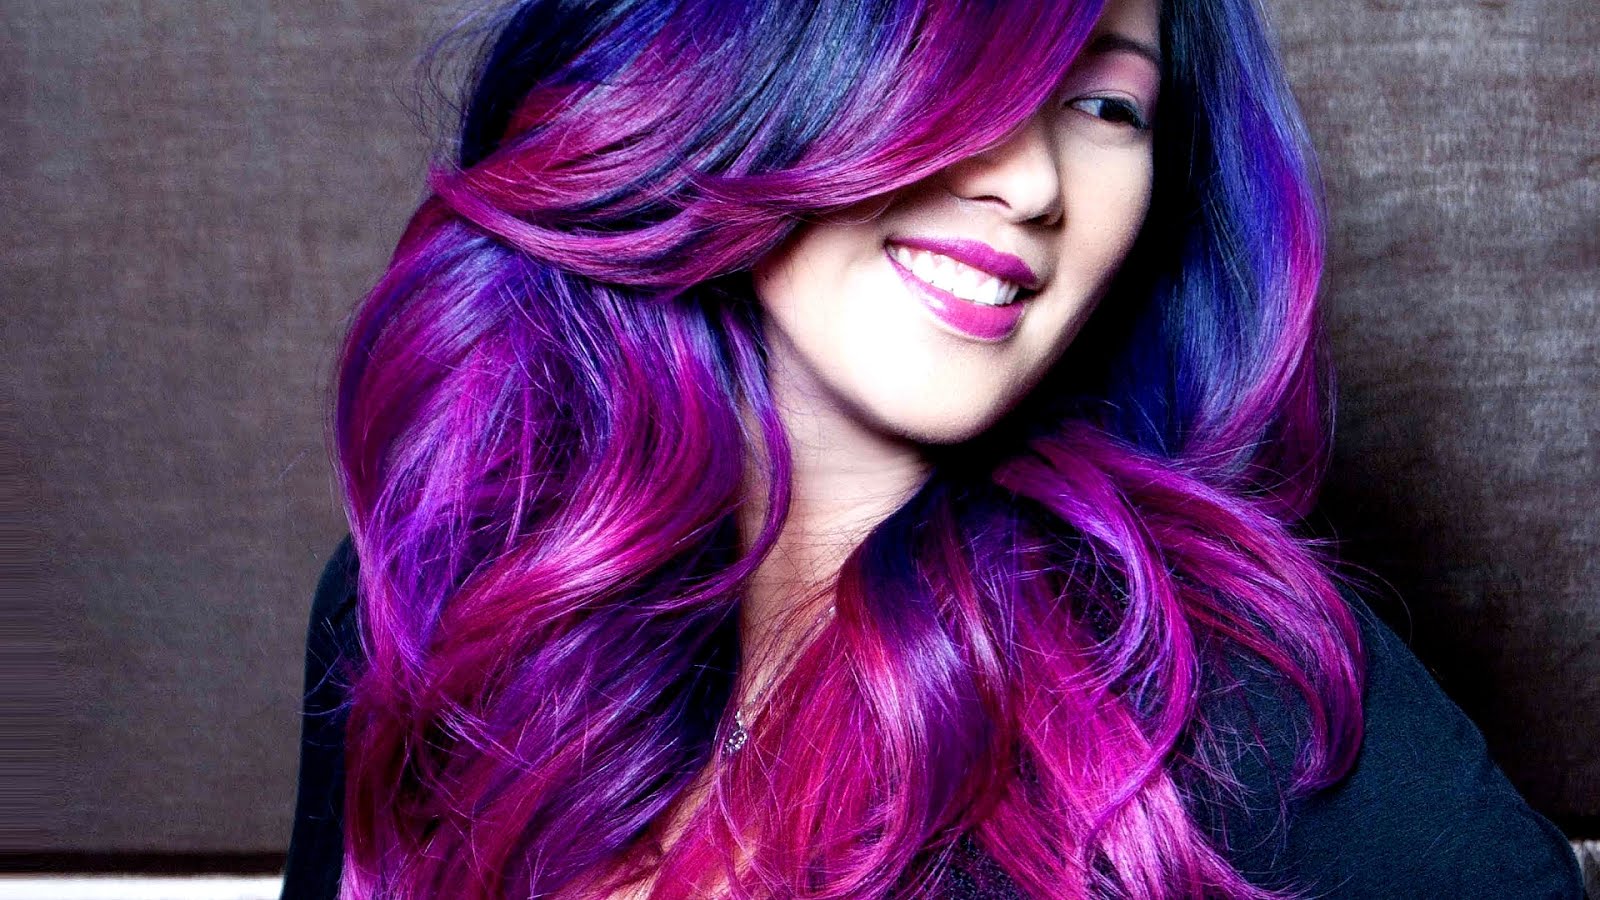 7. "The Best Hair Salons for Baby Blue and Pink Hair" - wide 9